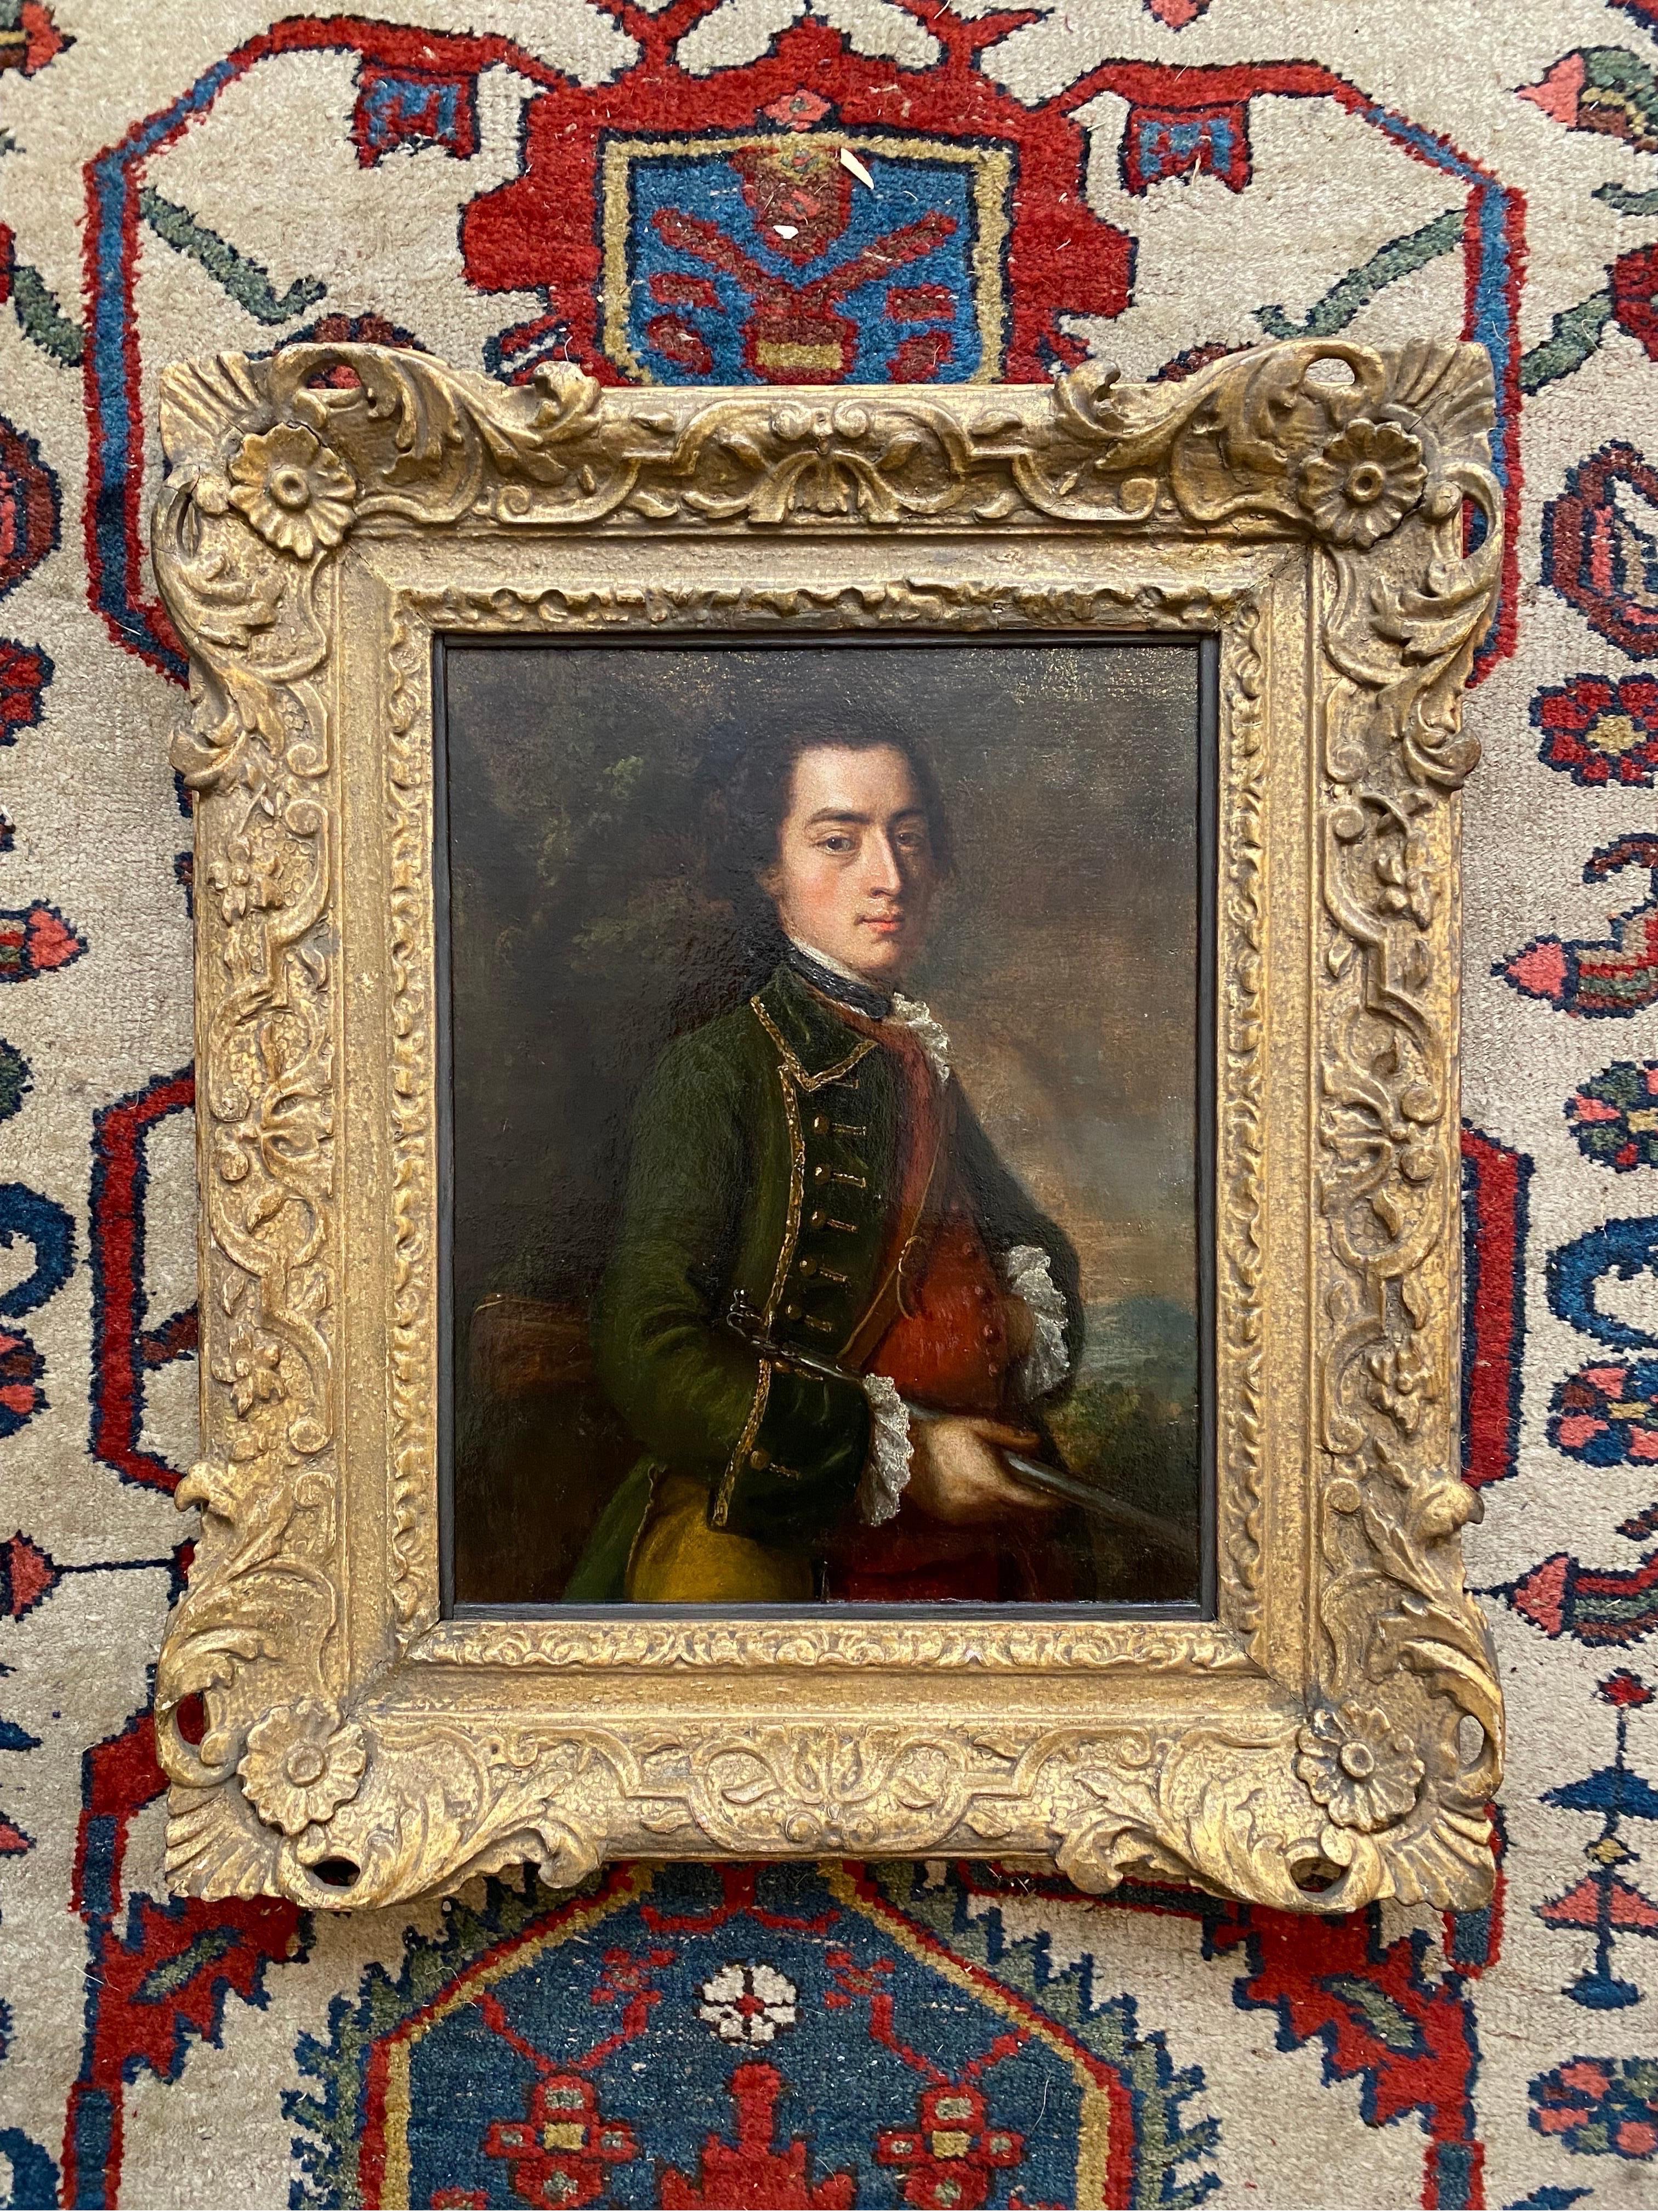 Portrait of a Man with a Rifle - Painting by English school 18th century